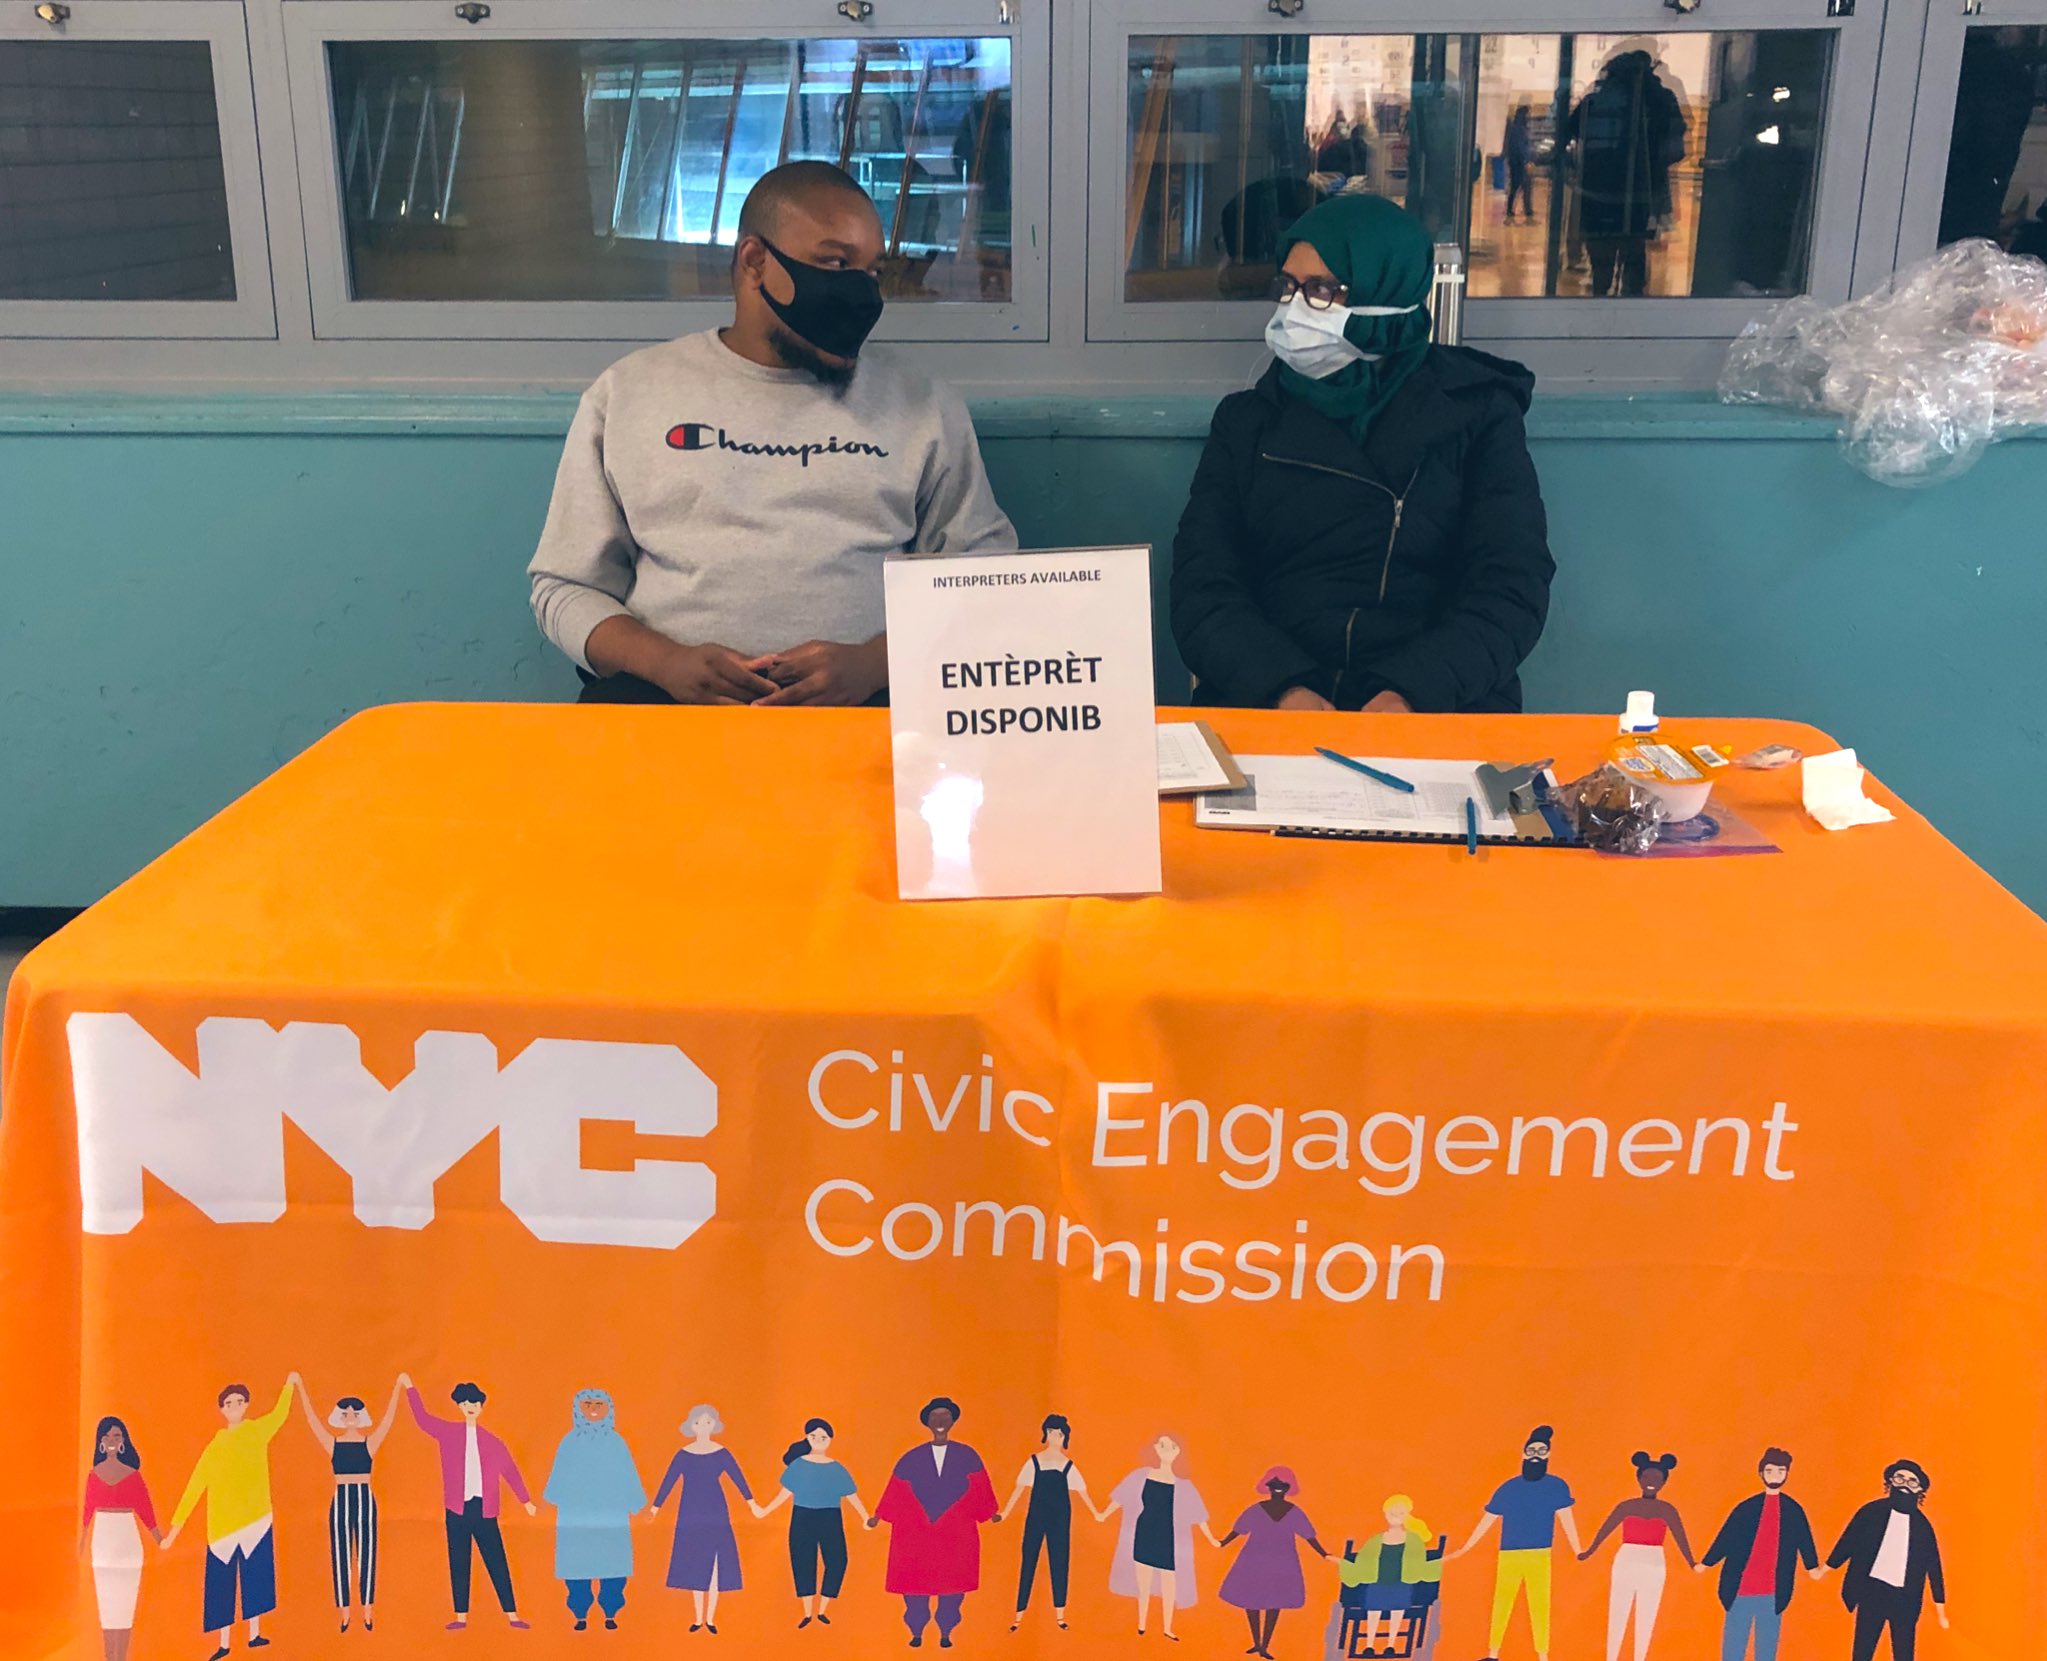 Two poll workers sitting at a table with orange table cloth with the NYC Civic Engagement Commission logo in front and a sign posted with Interpreters Available